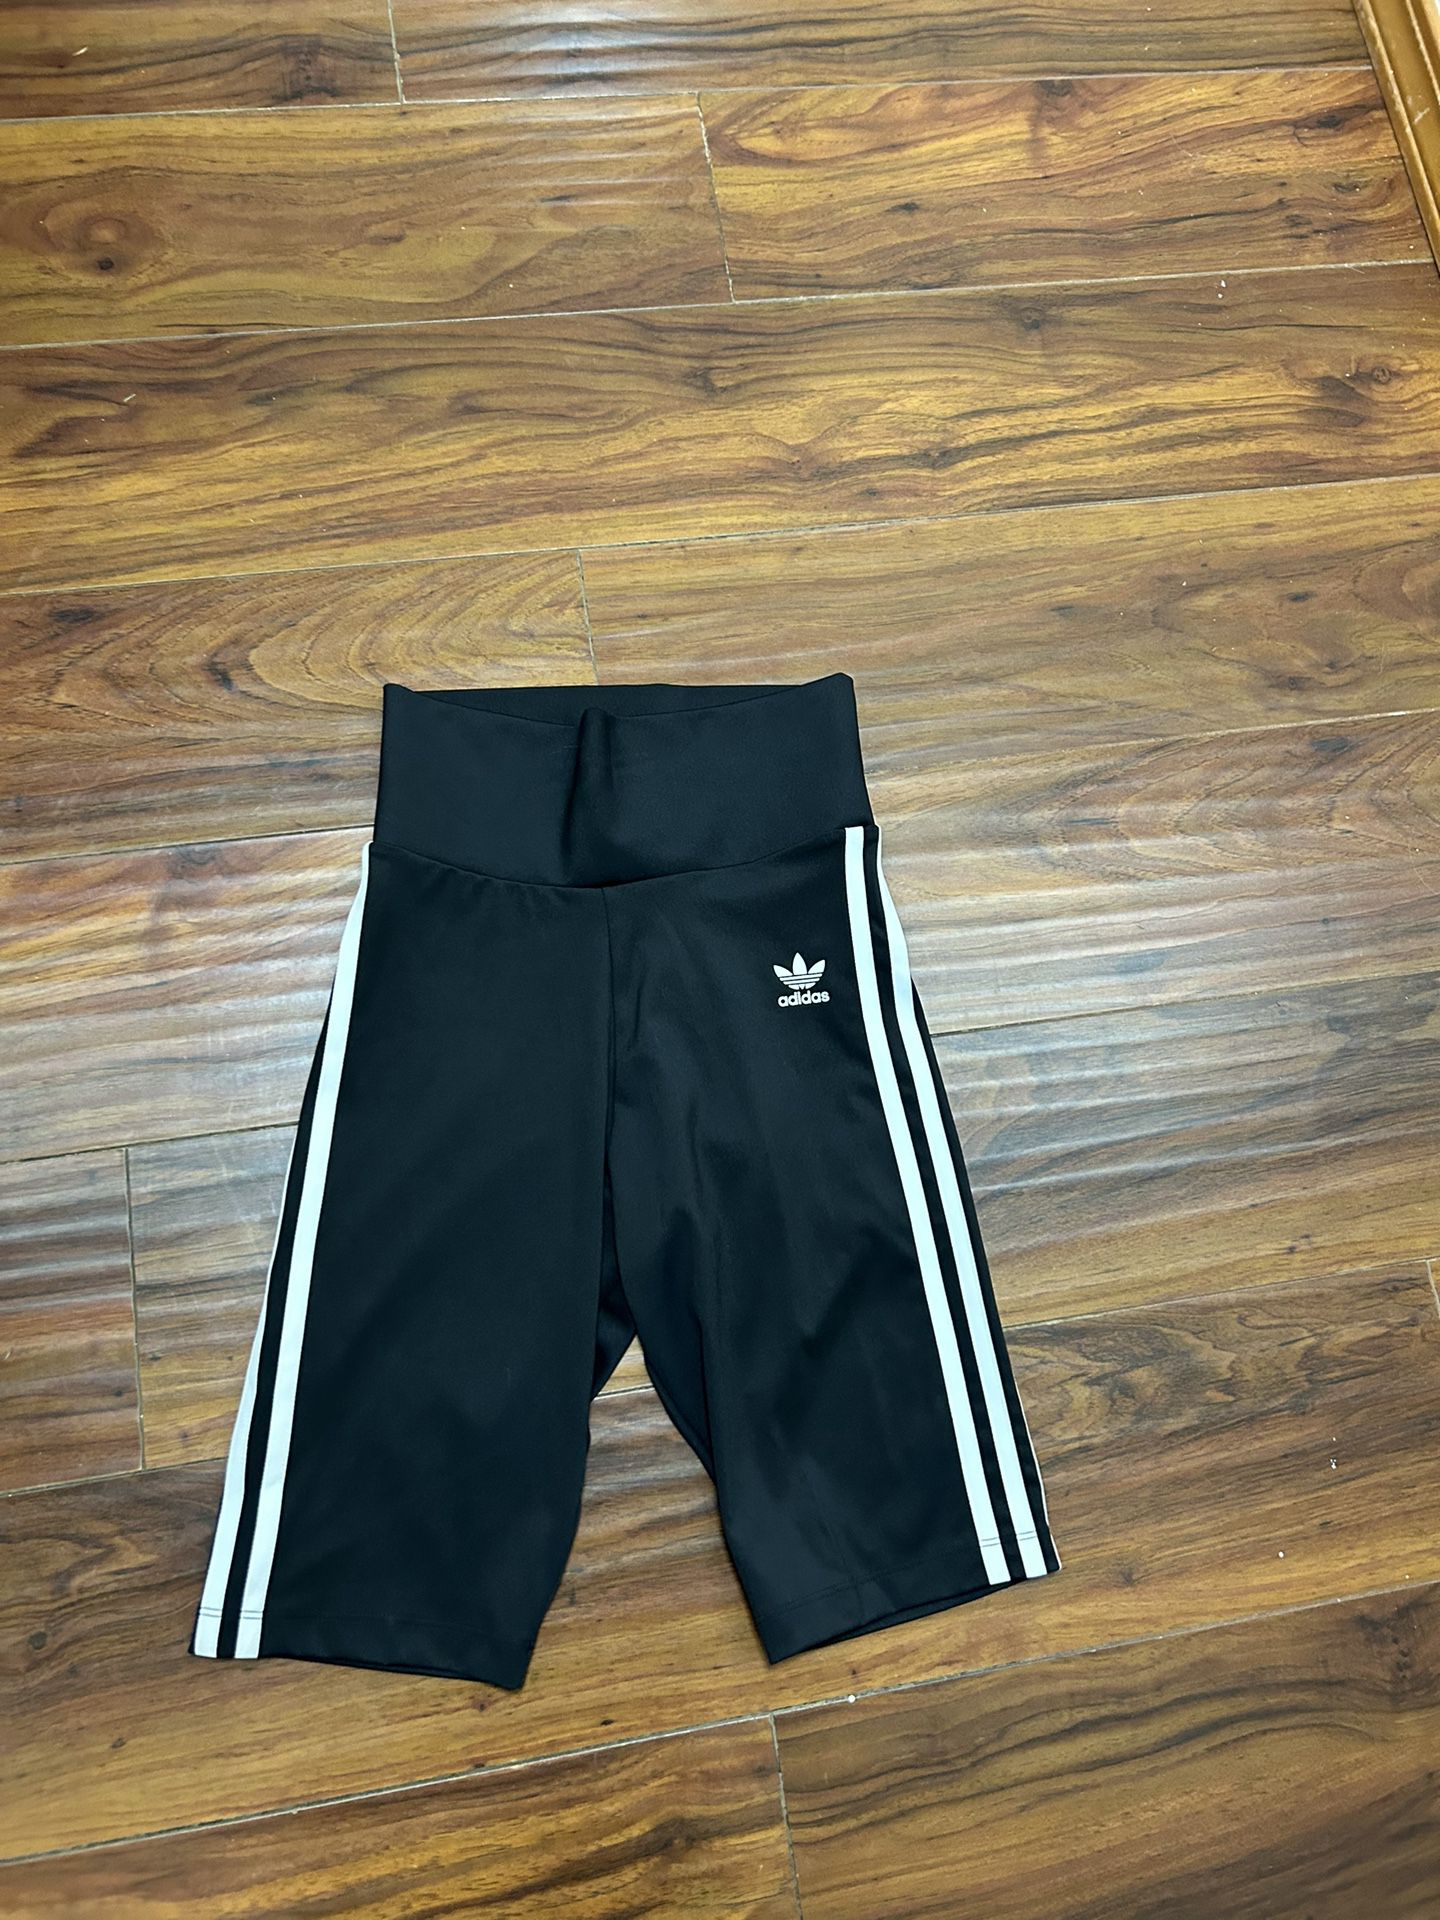 NEW Adidas Xsmall, Black With Stripes, Shorts